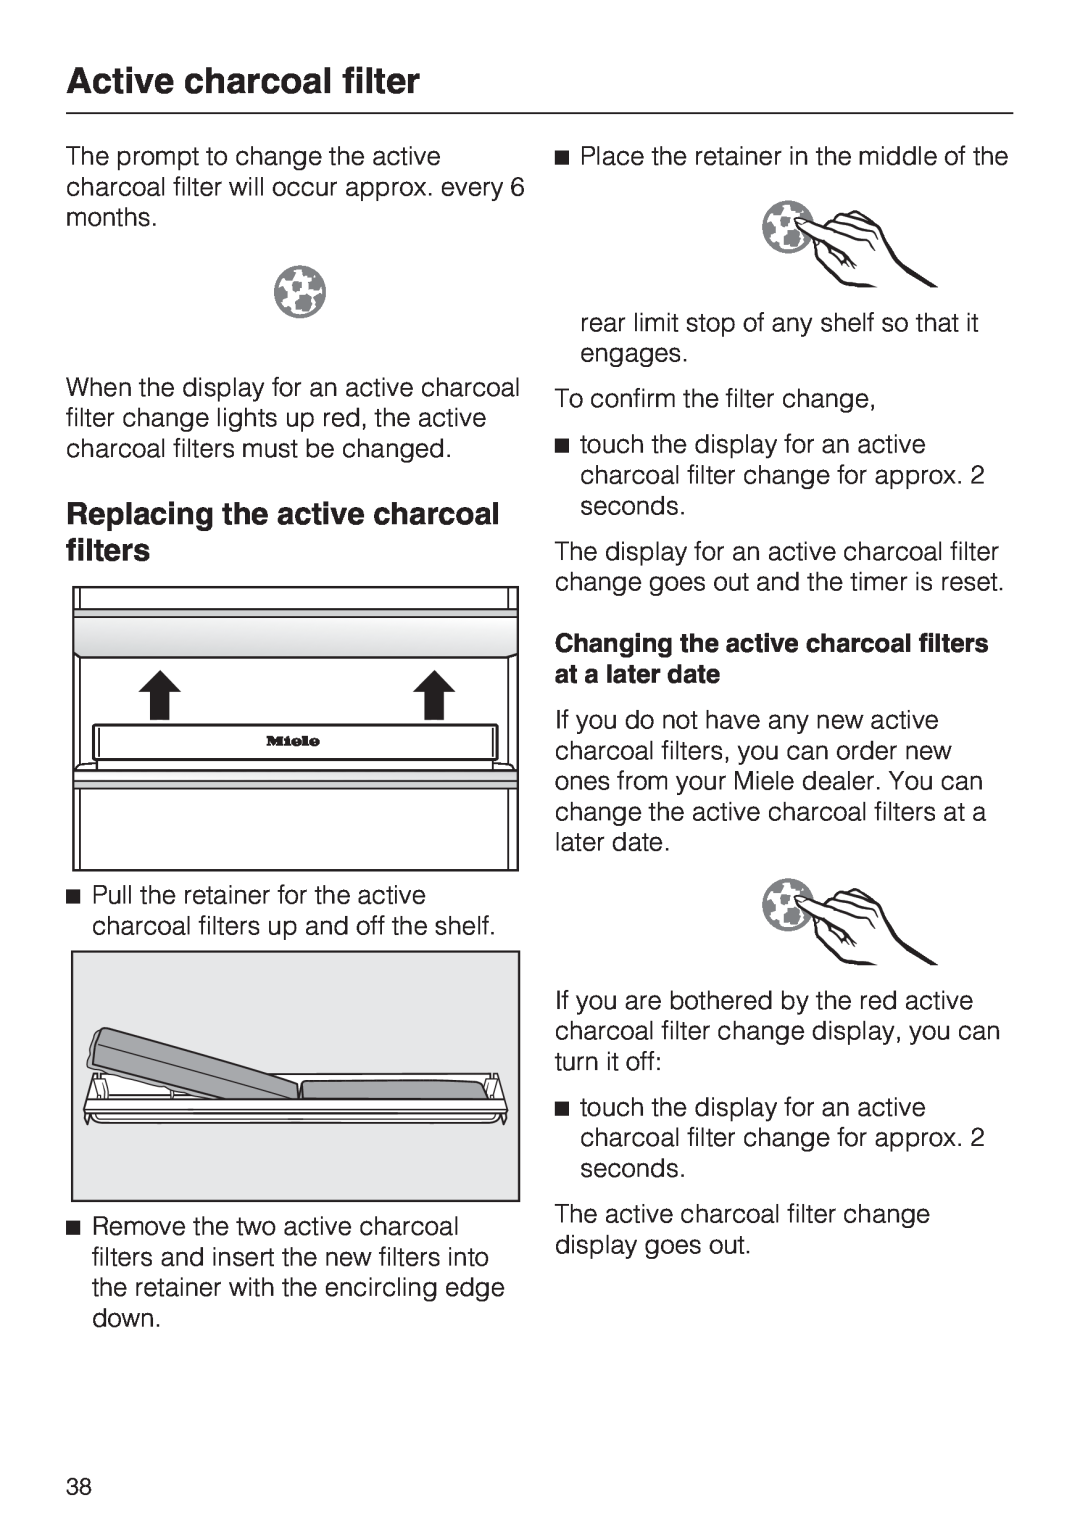 Miele KFN 14943 SD ED installation instructions Active charcoal filter, Replacing the active charcoal filters 